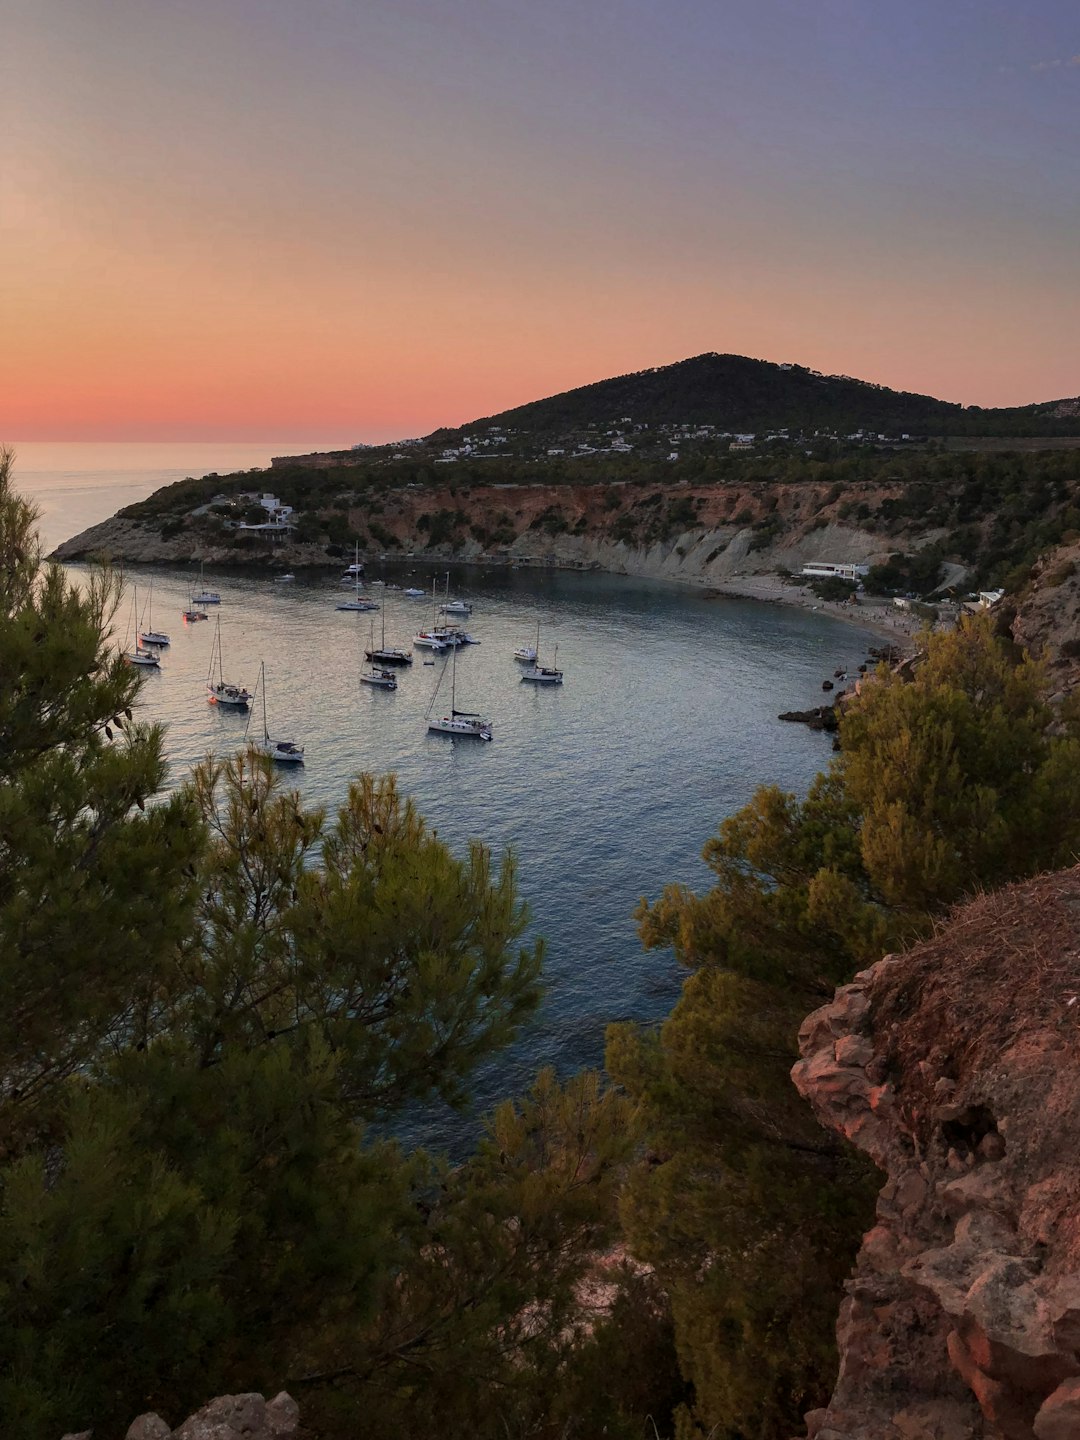 Travel Tips and Stories of Cala d’Hort in Spain